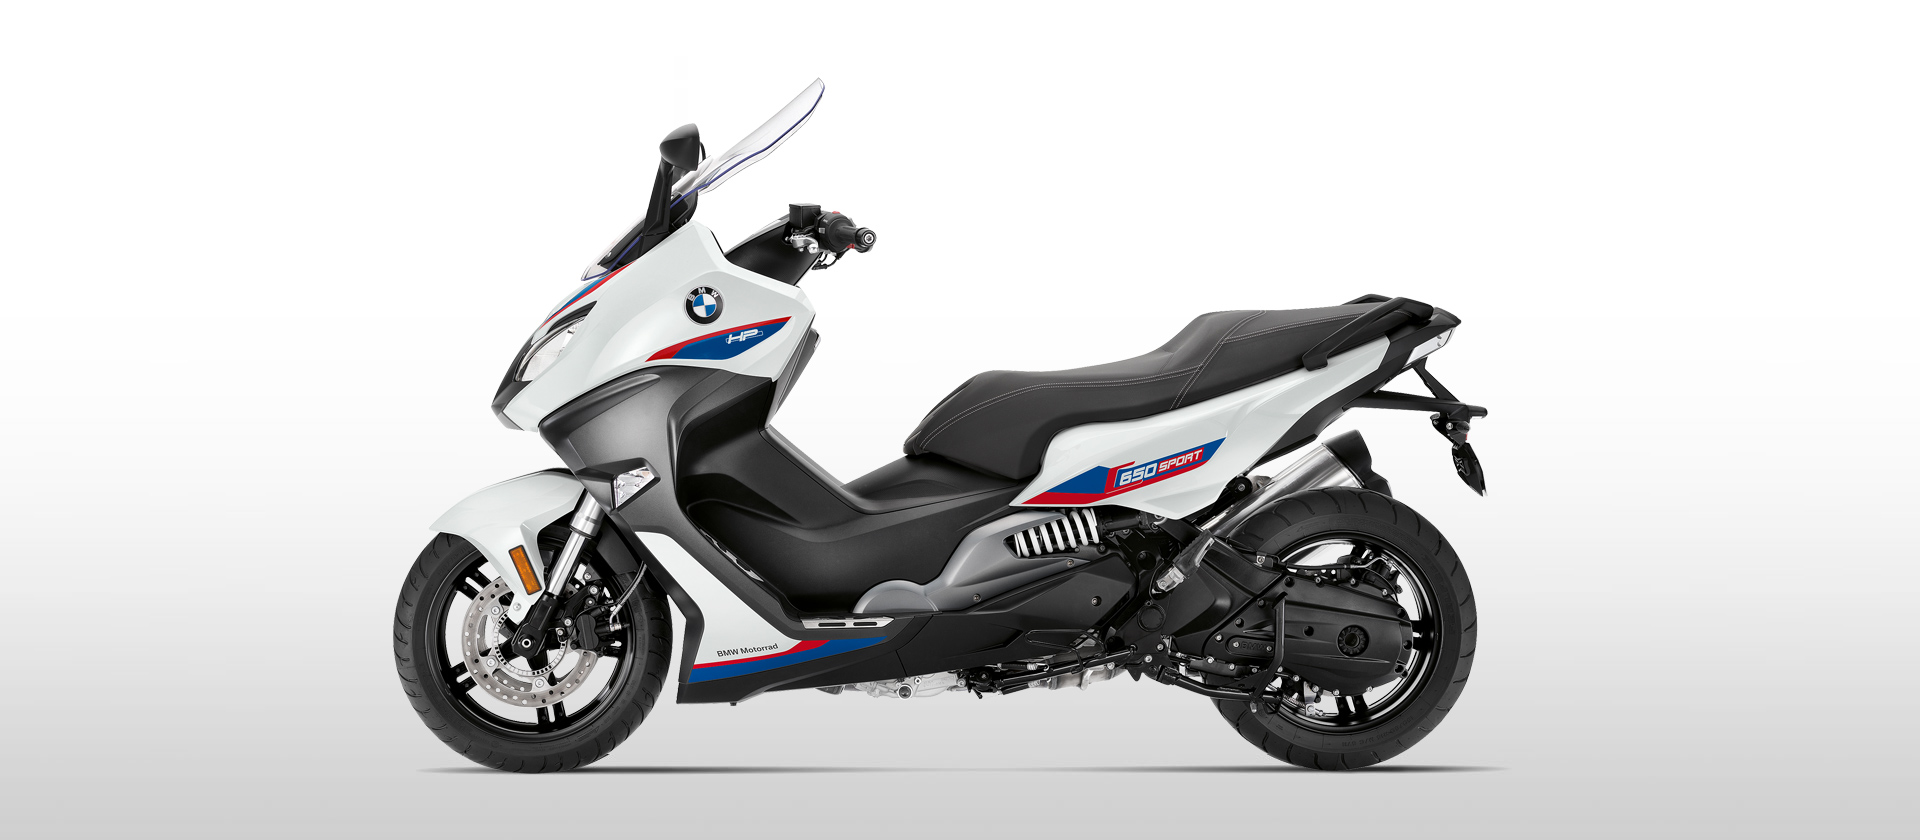 Bmw C 650 Gt Sport Welcome To The Bowker Motor Group